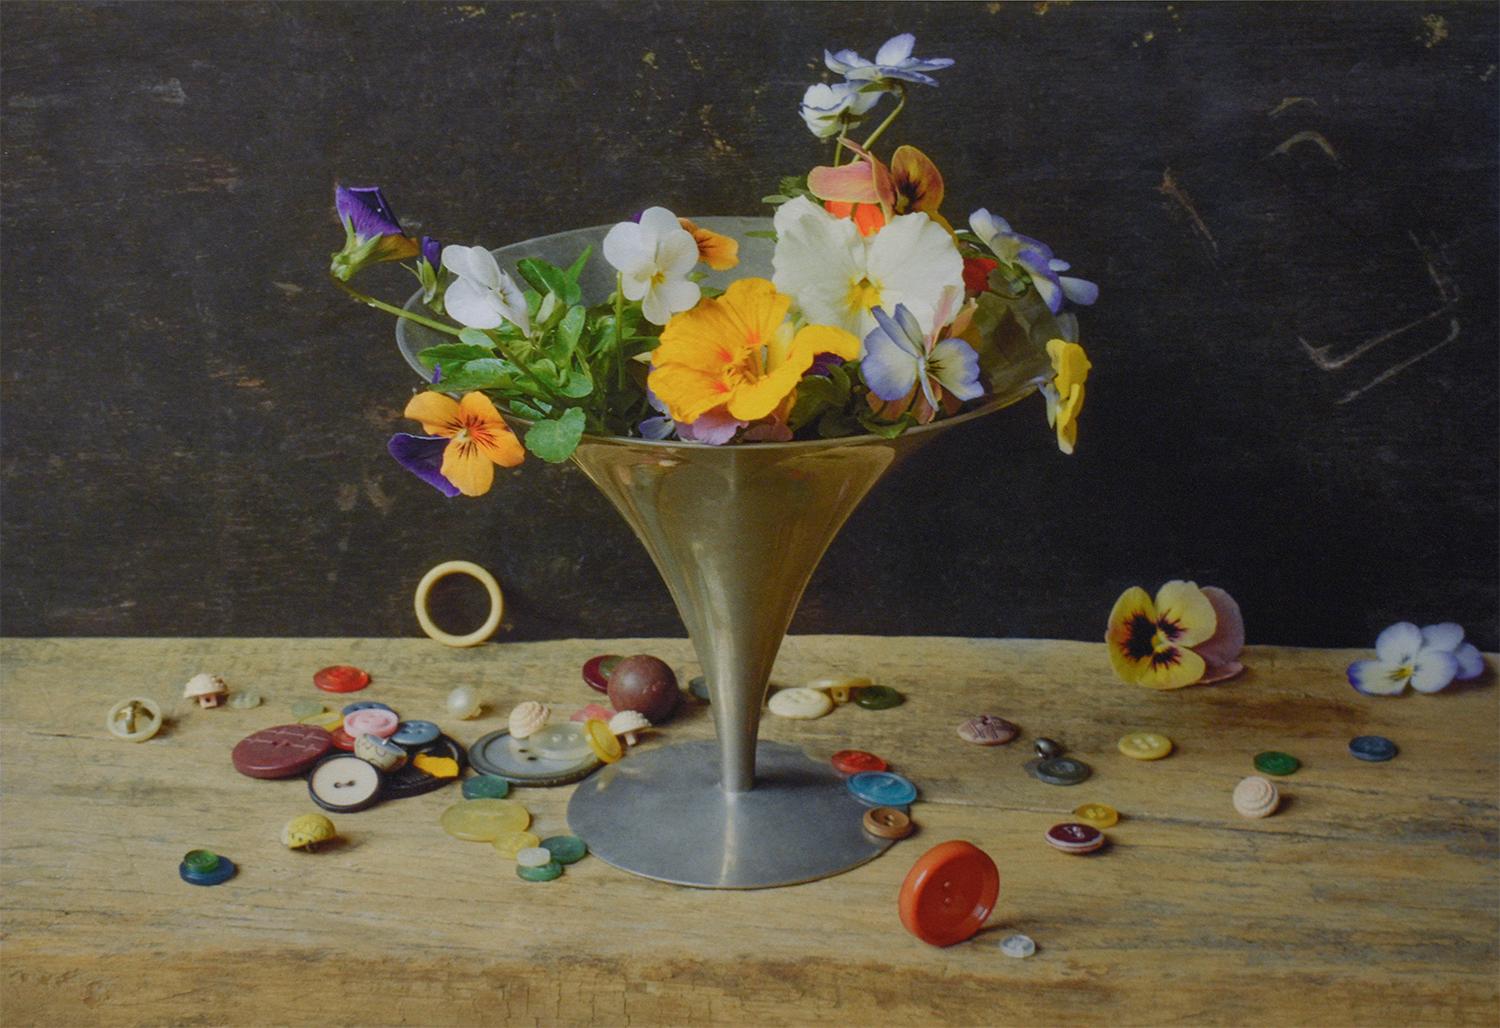 Flowers, Compote & Buttons (Color Still Life Photograph of Flowers on Tabletop)